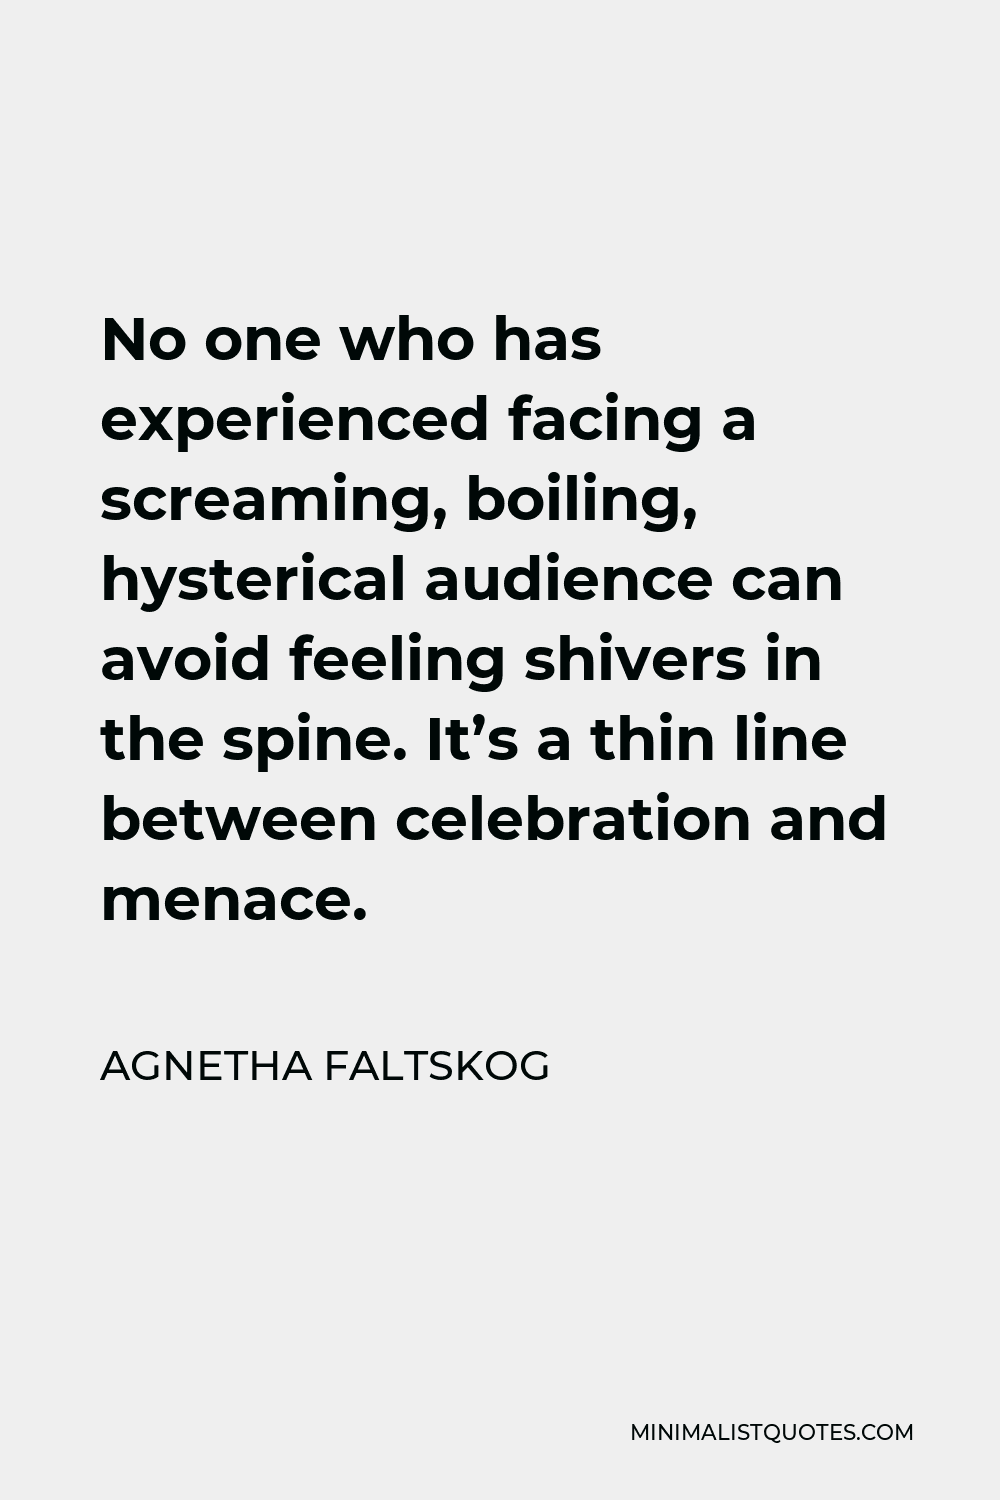 Agnetha Faltskog Quote - No one who has experienced facing a screaming, boiling, hysterical audience can avoid feeling shivers in the spine. It’s a thin line between celebration and menace.